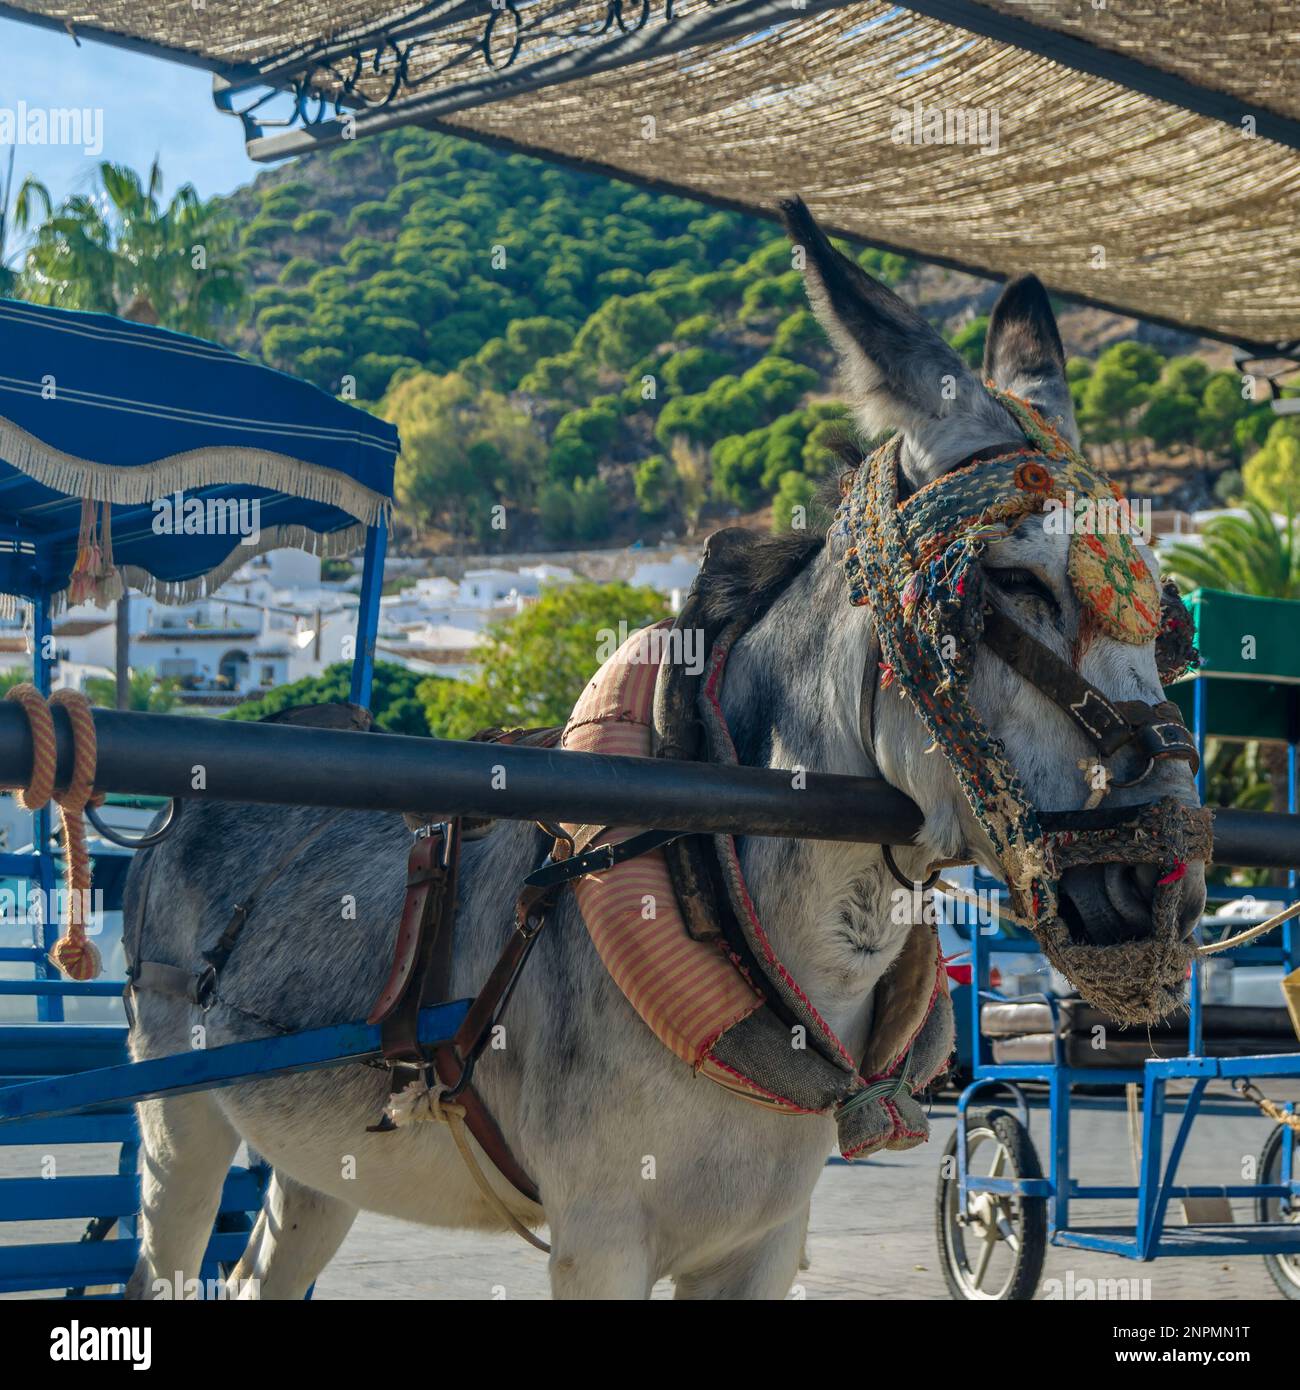 Donkeys in the town of Mijas, Andalusia, southern Spain. One of the tourist attractions in Mijas is sightseeing in Burro-taxis or donkey-drawn carts a Stock Photo